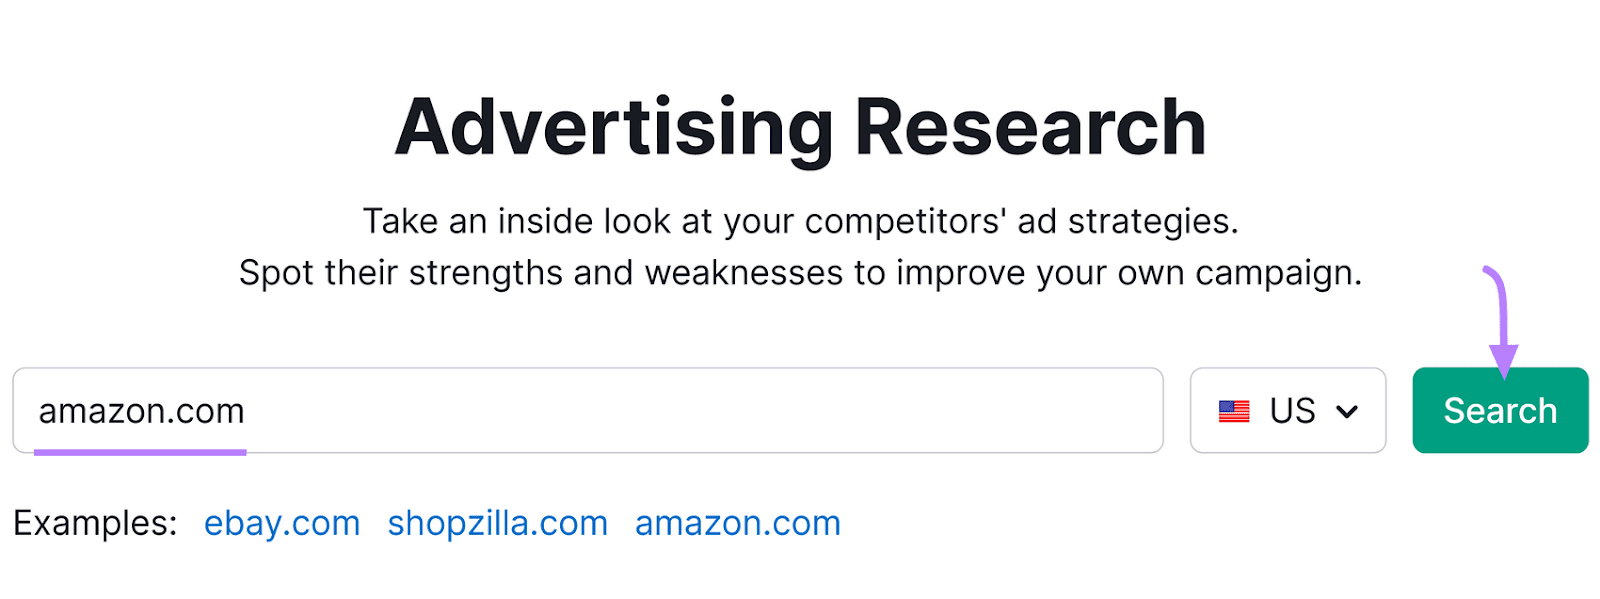 Semrush dashboard showing "Advertising Research," with "amazon.com" typed in the search bar, and a highlighted search button.